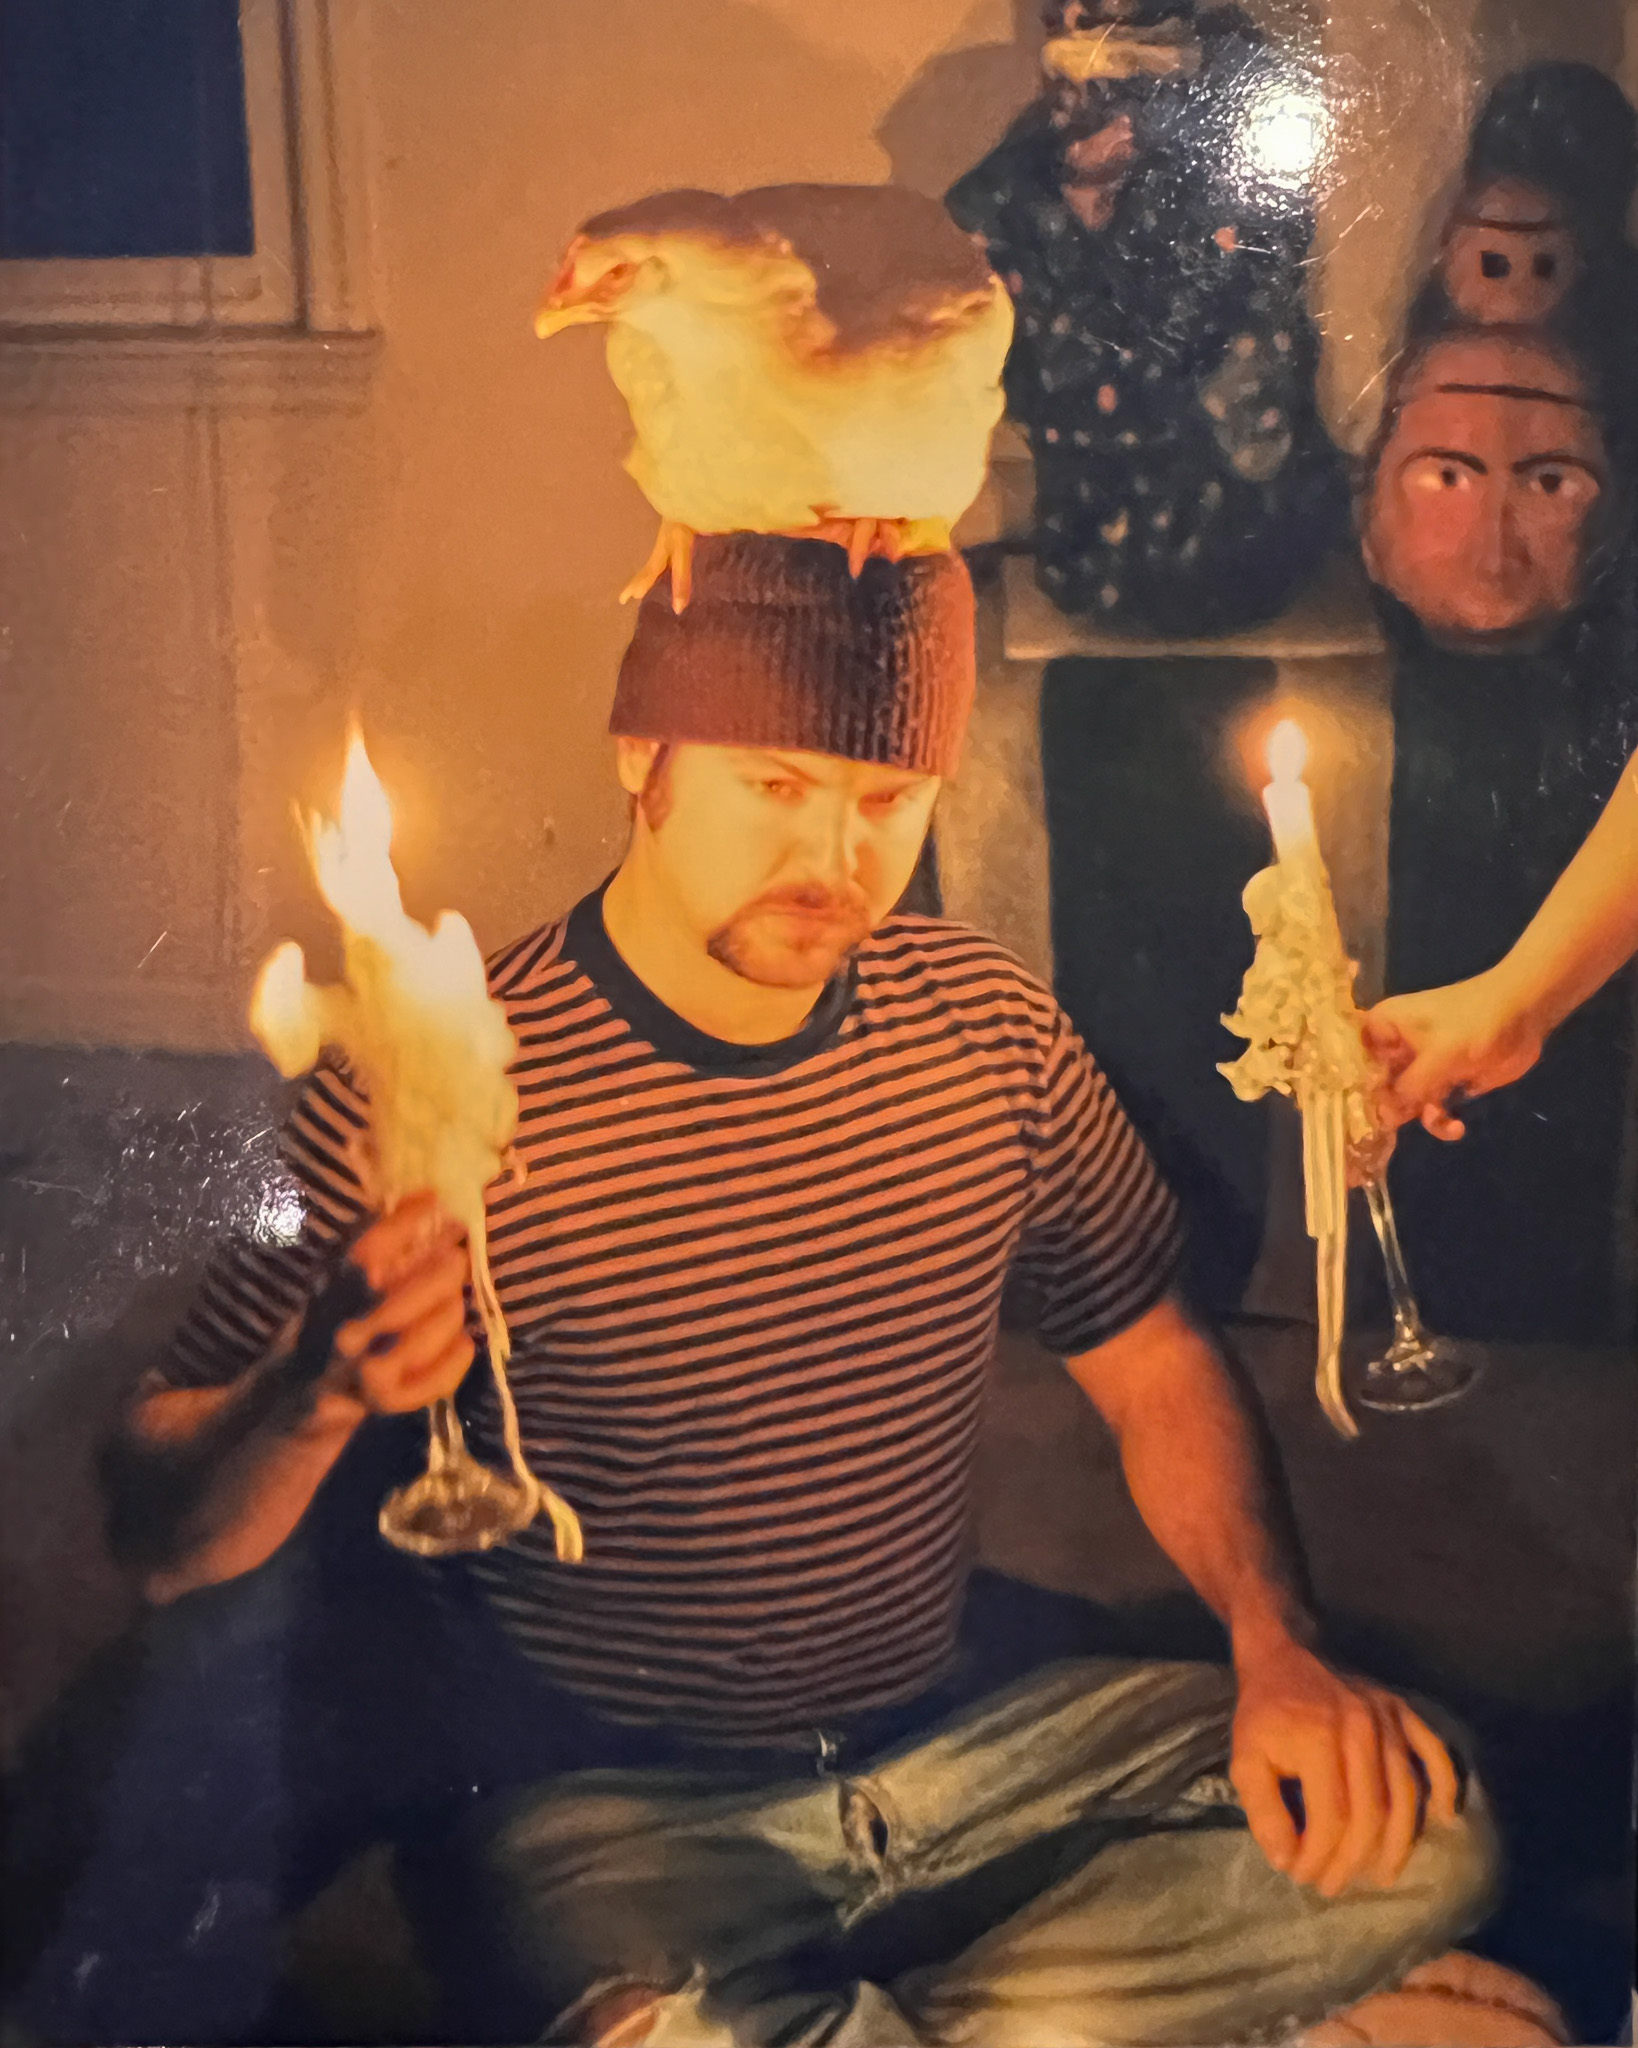 artist john milan poses with a candle, chicken on his head for a creative photoshoot